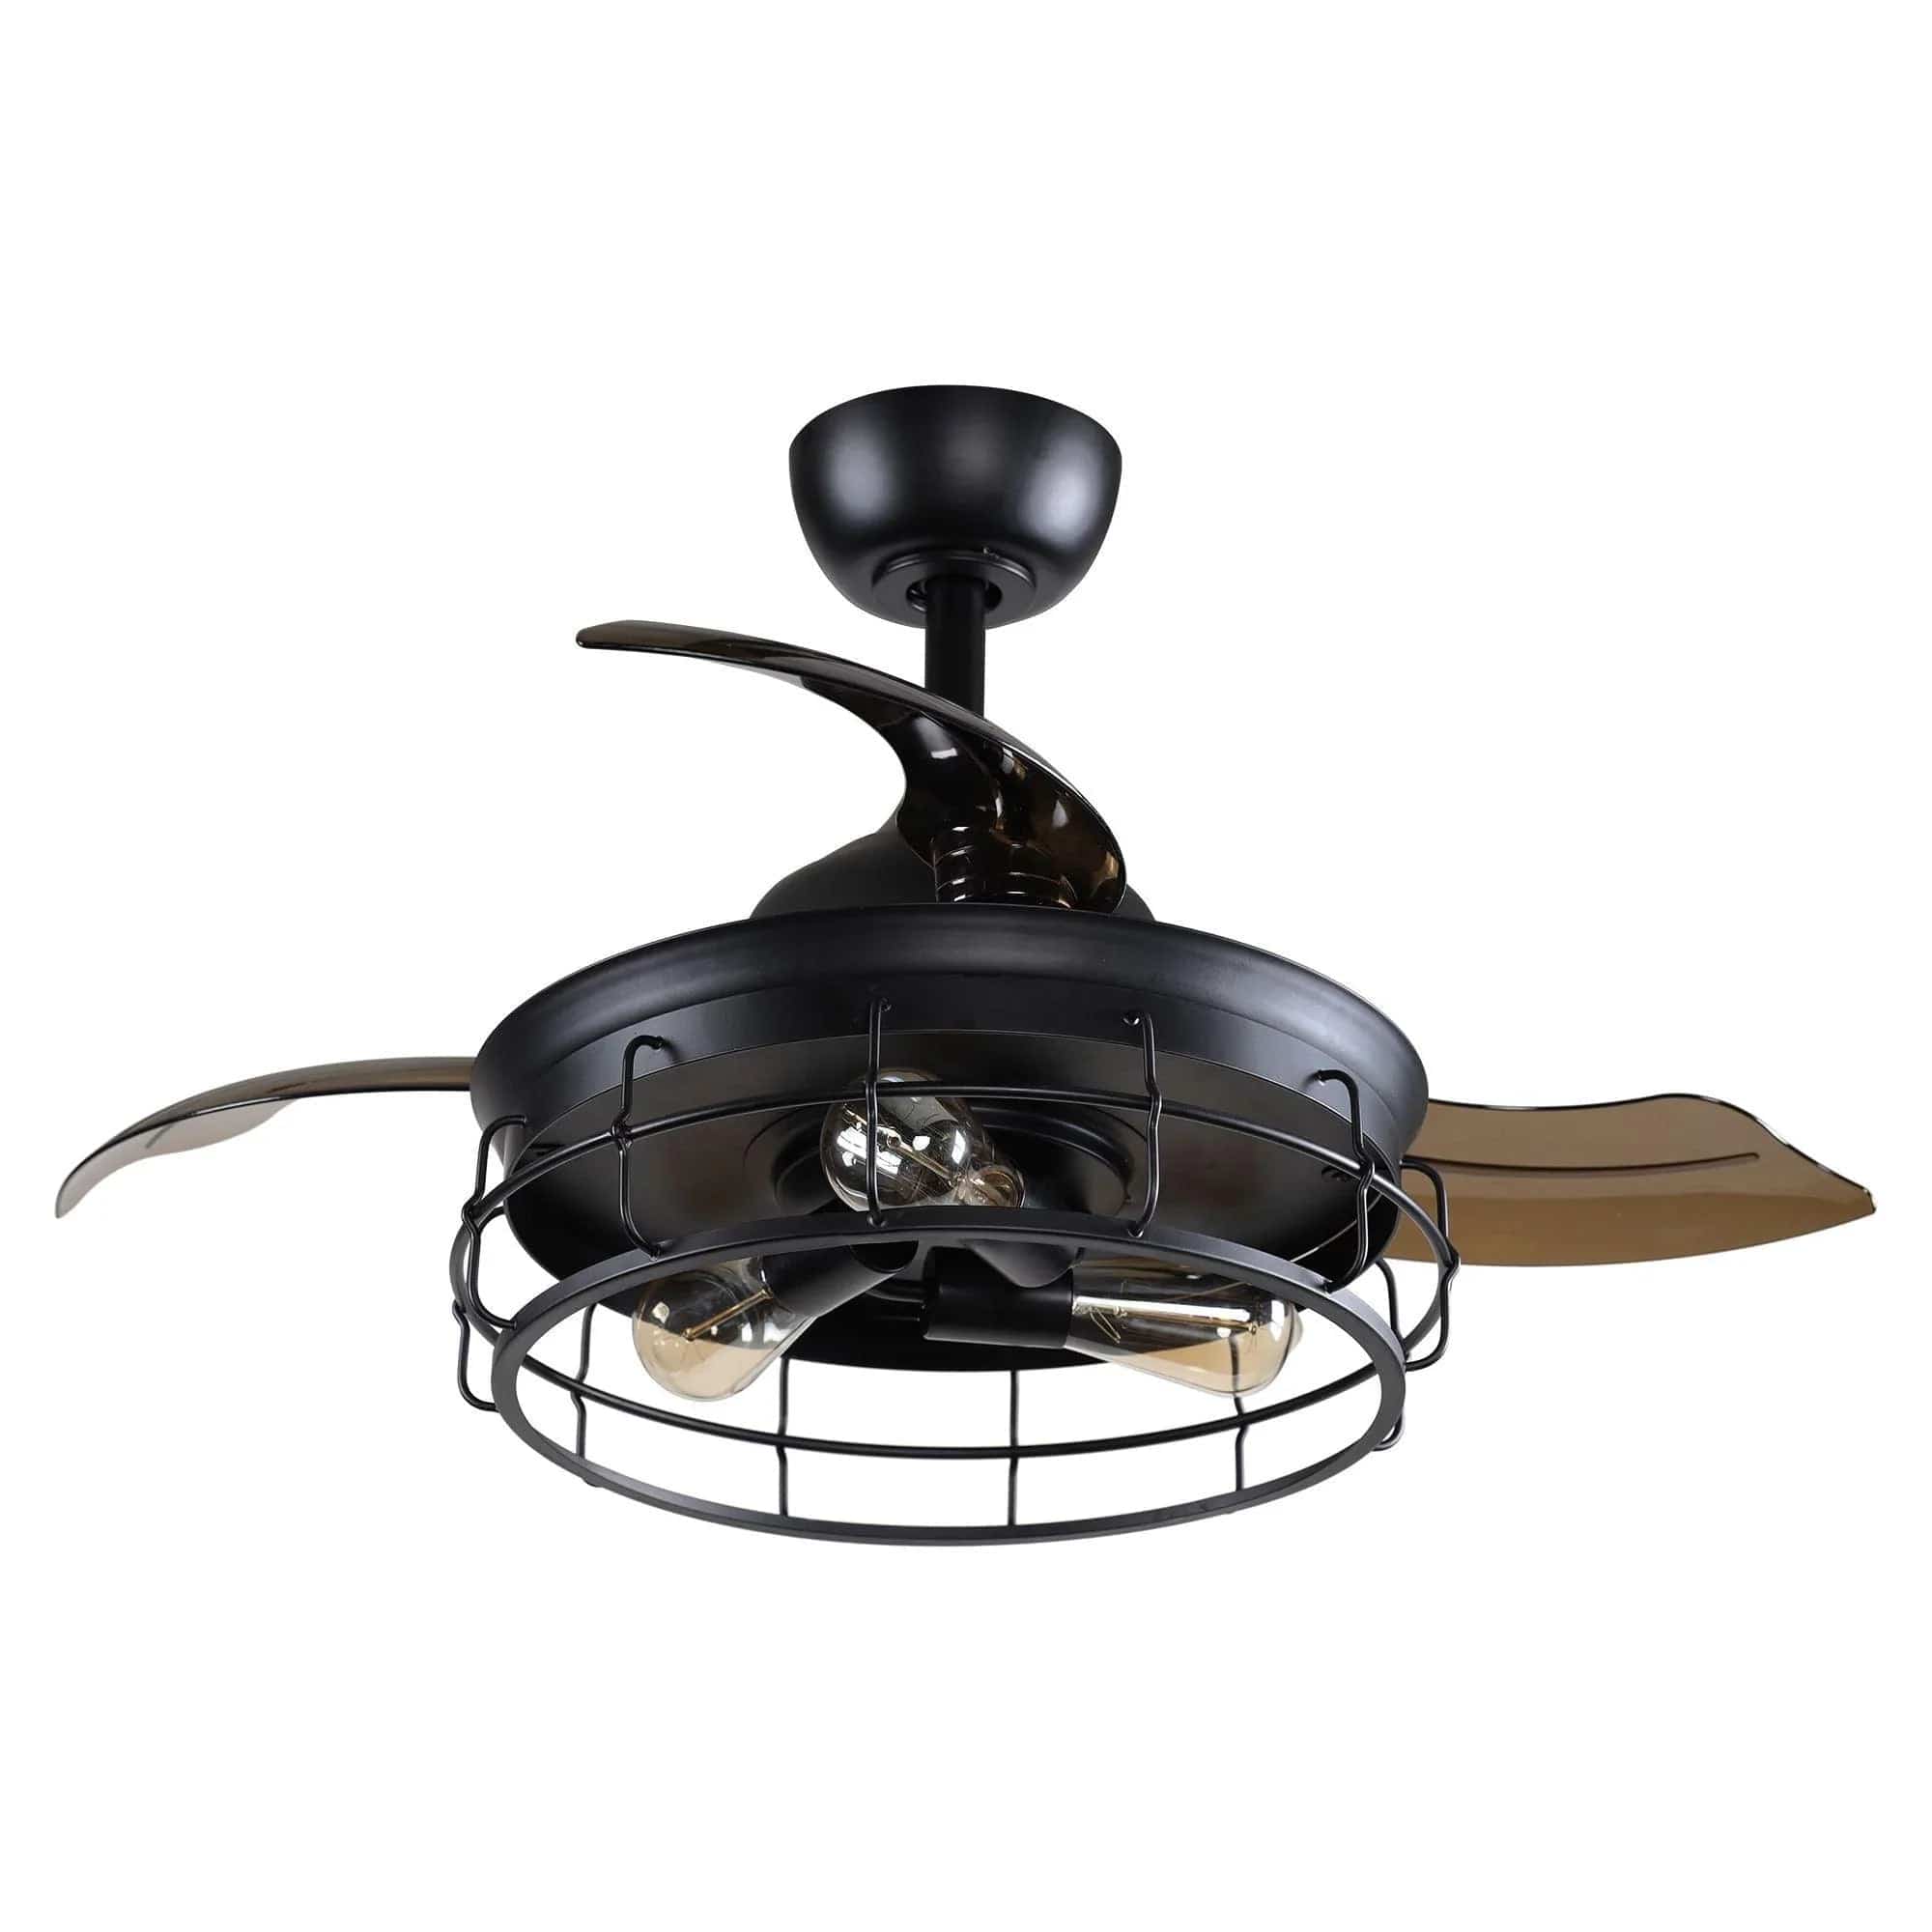 Parrot Uncle Parrot Uncle 36 In. Pickett Industrial Ceiling Fan with Lighting and Remote Control Ceiling Fan F3504Q110V